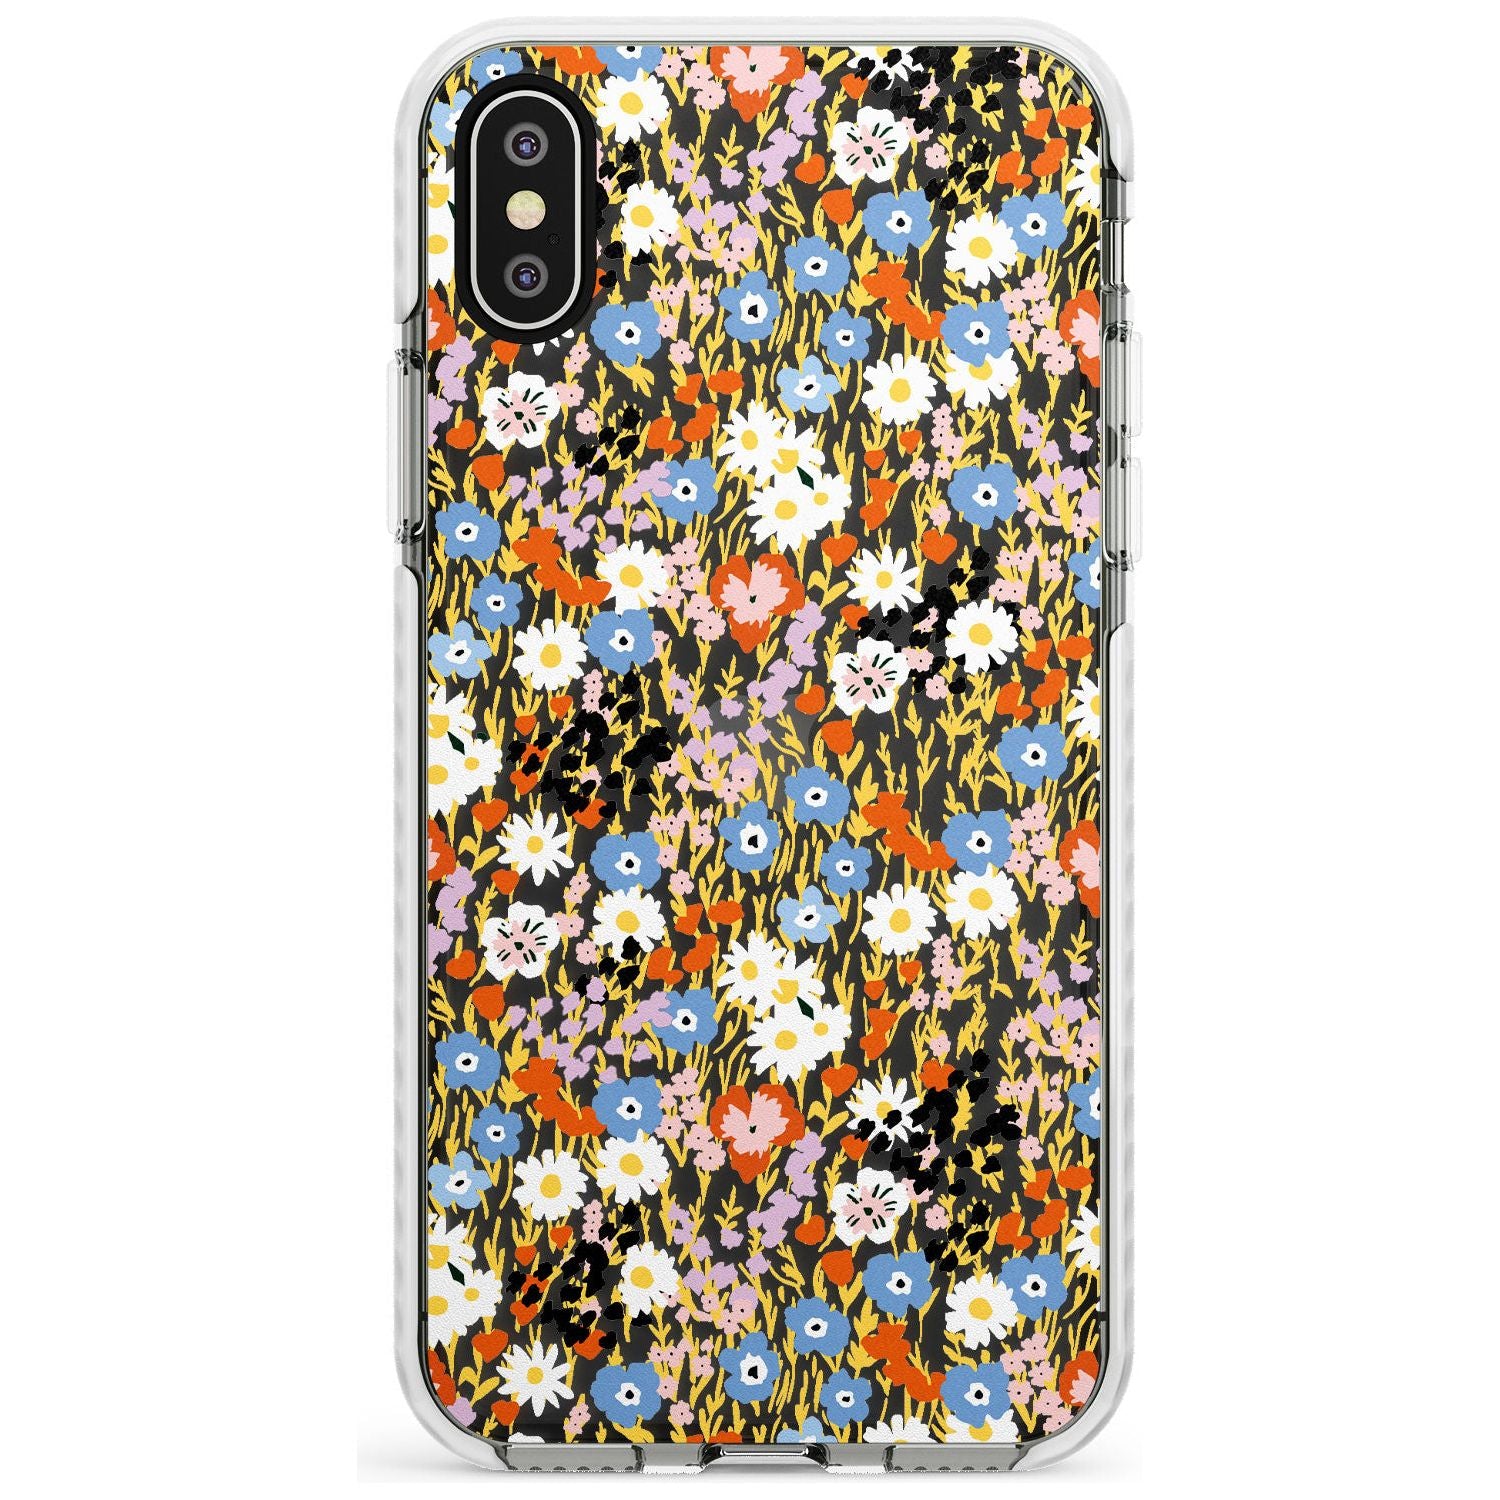 Busy Floral Mix: Transparent Slim TPU Phone Case Warehouse X XS Max XR